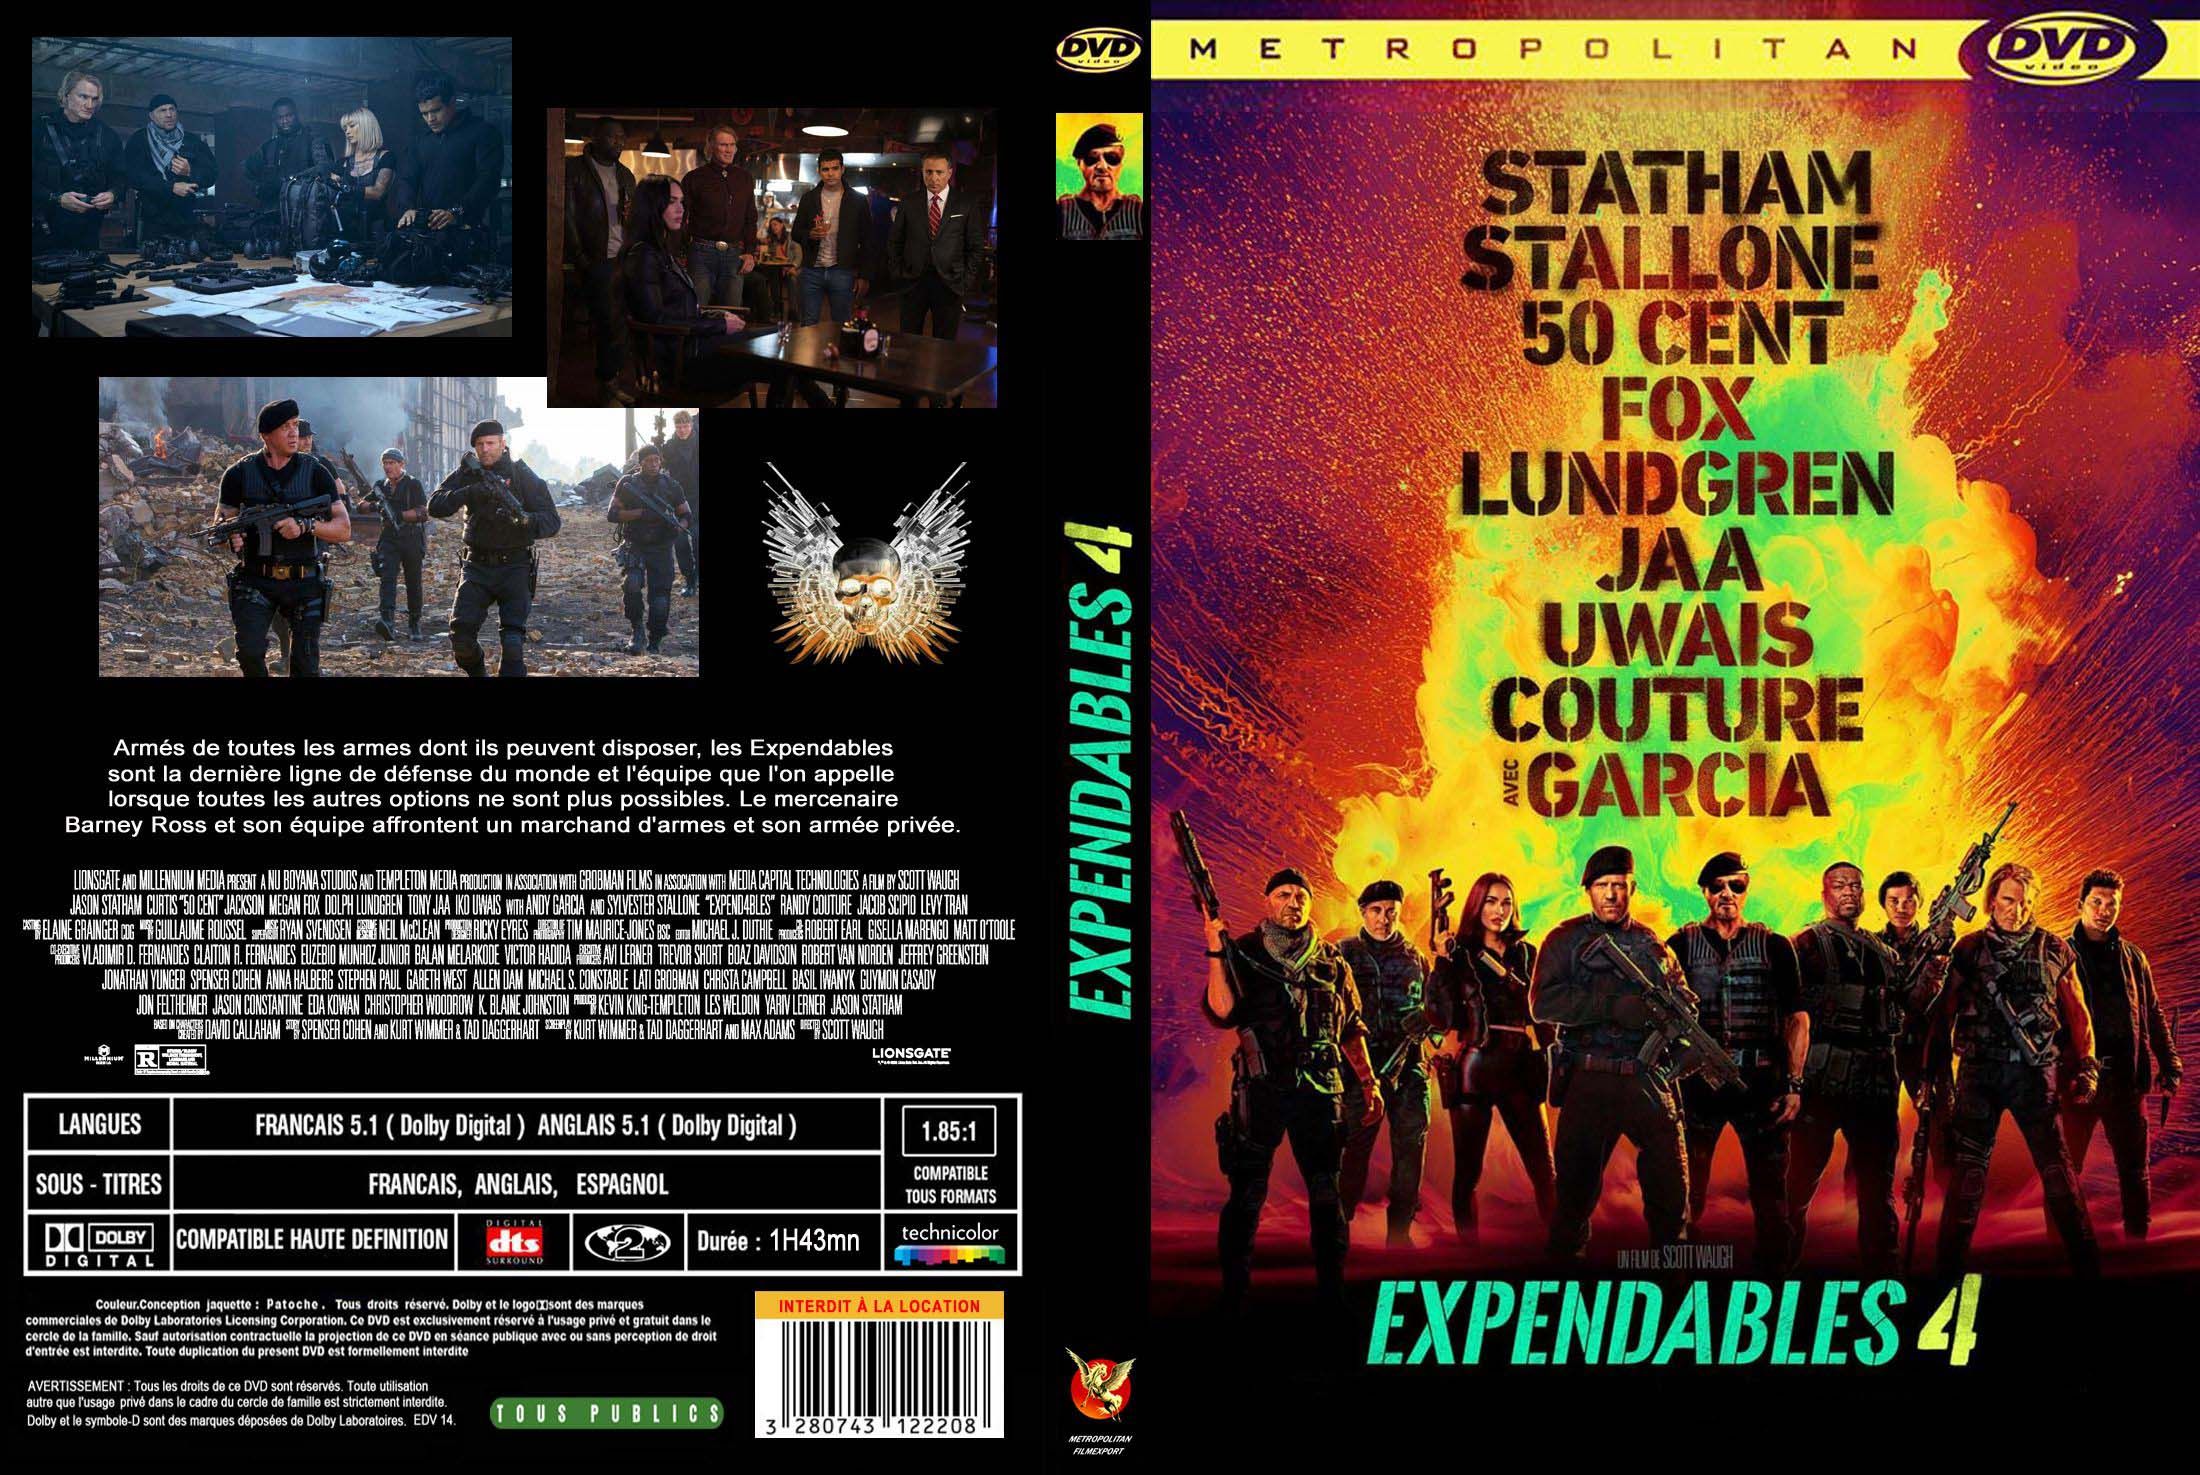 Jaquette DVD Expendables 4 custom